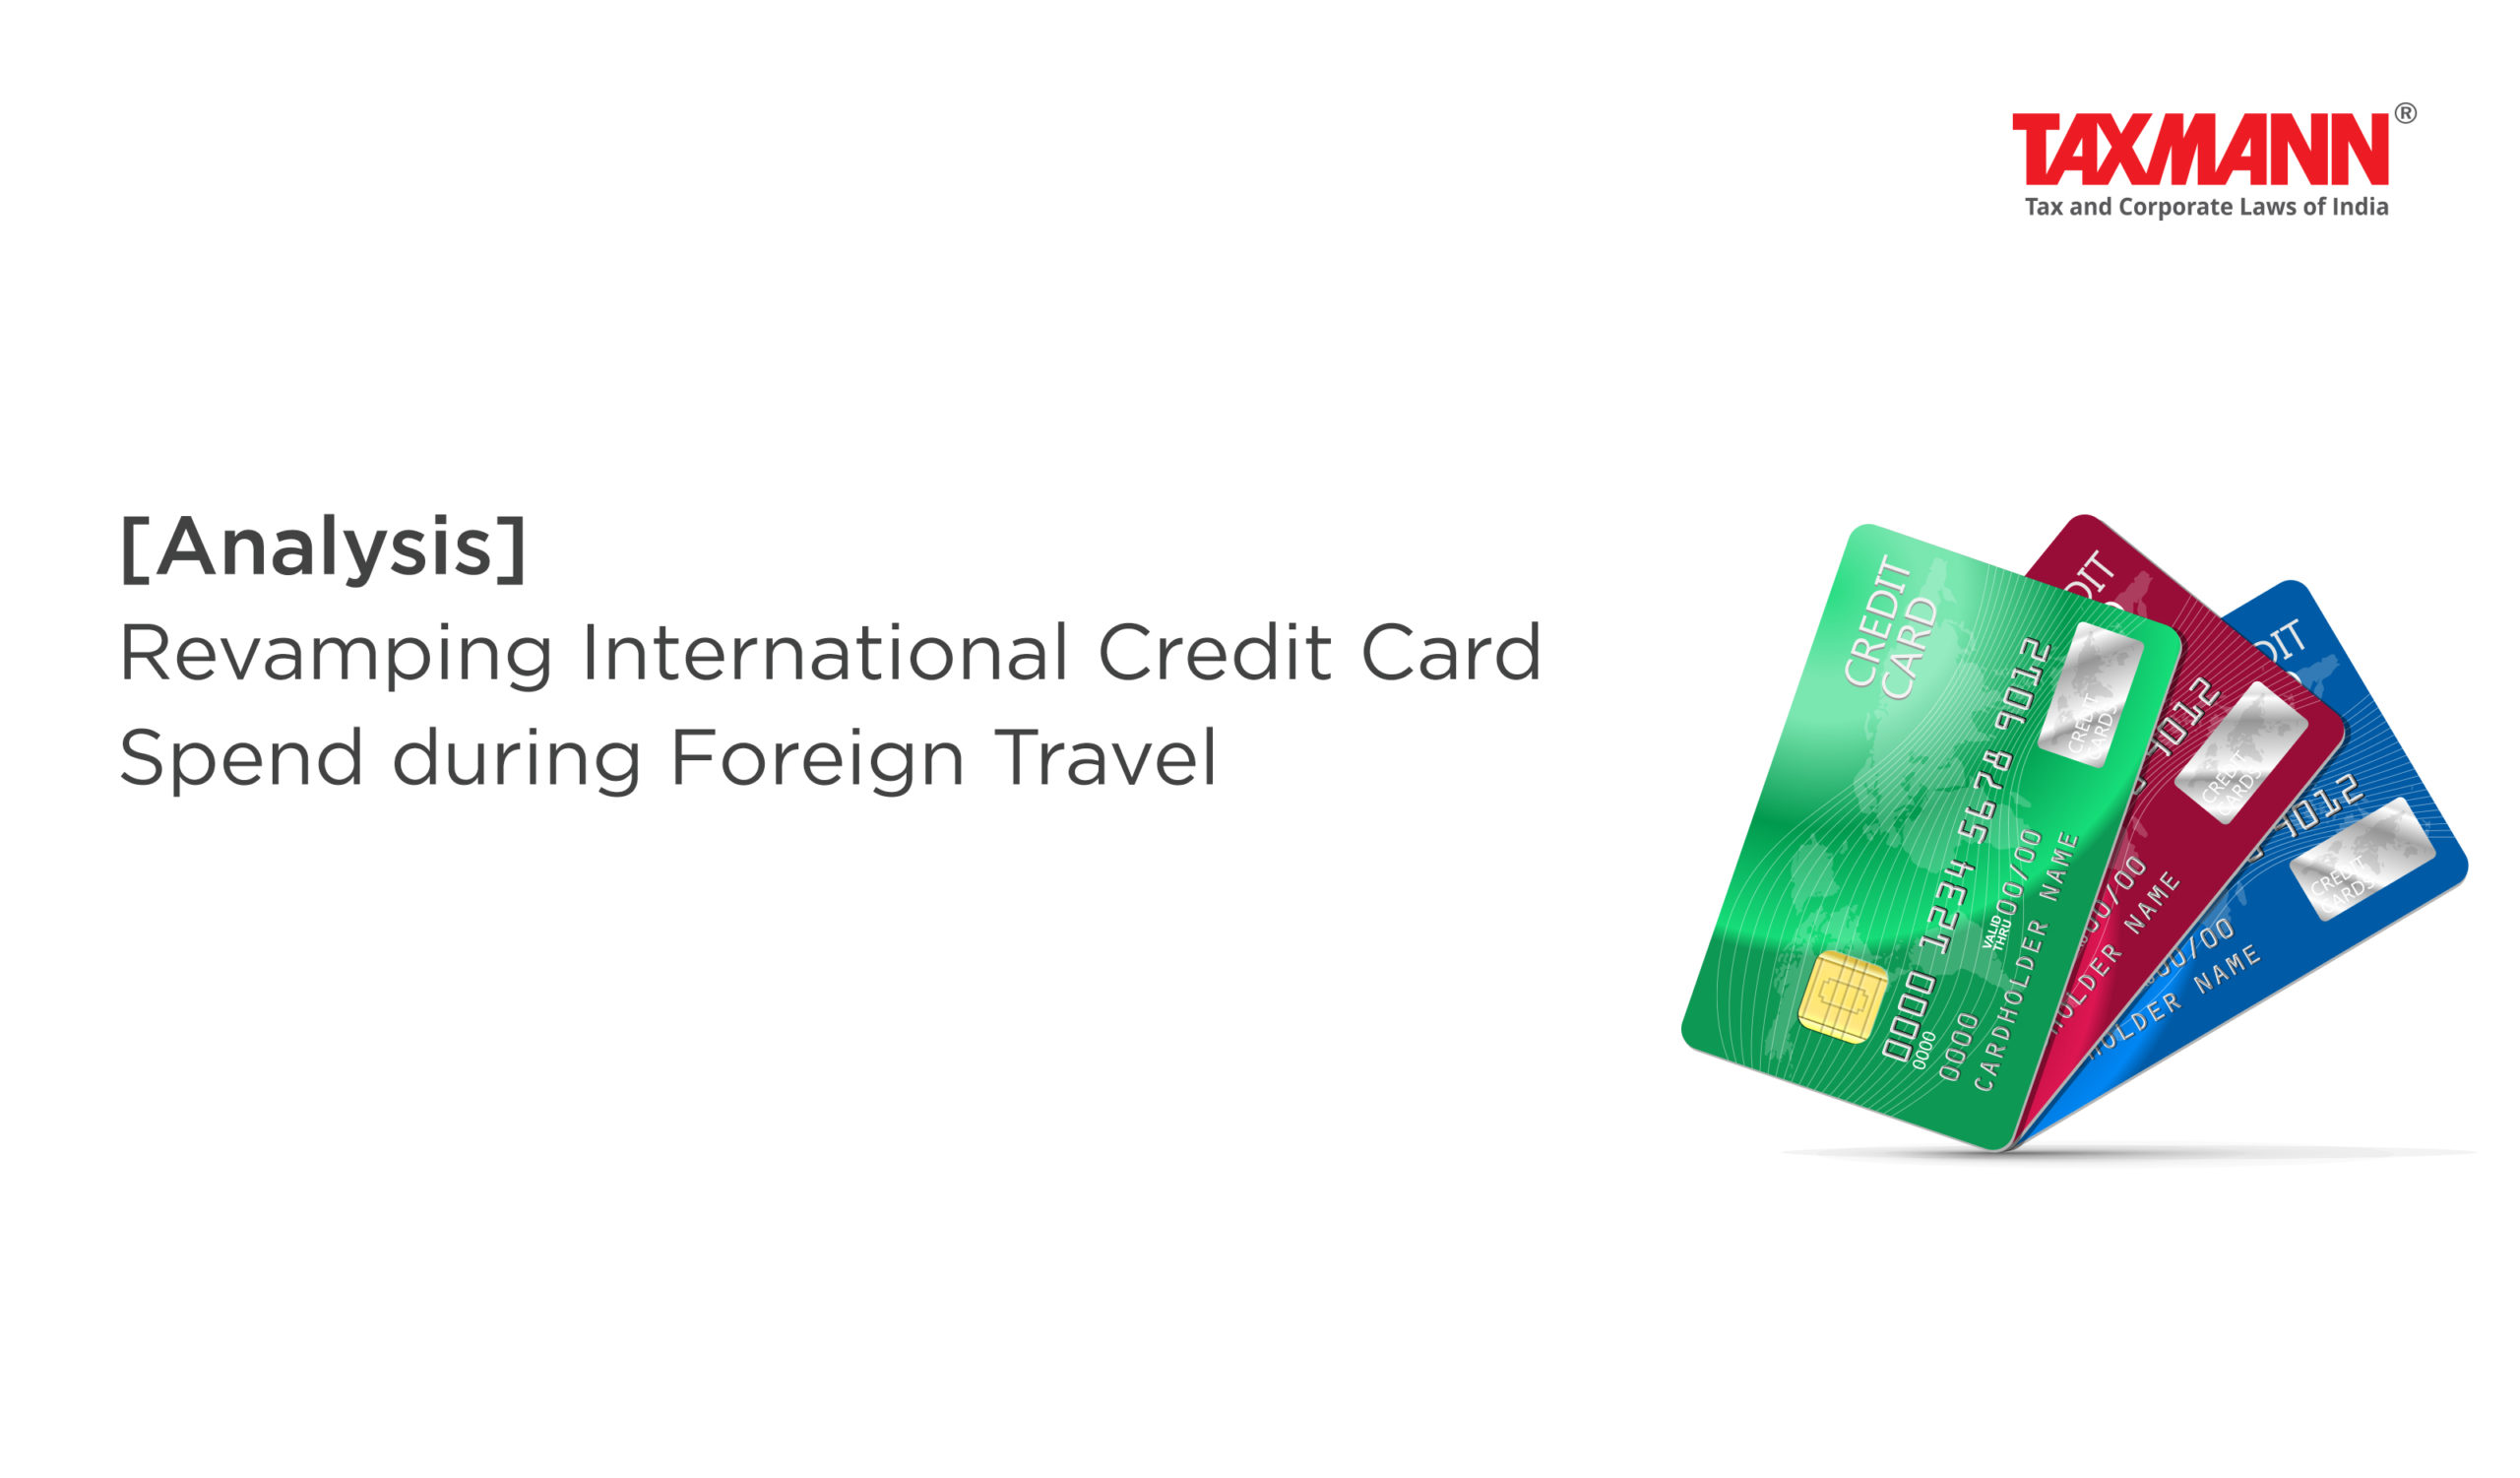 International Credit Card; Foreign Travel